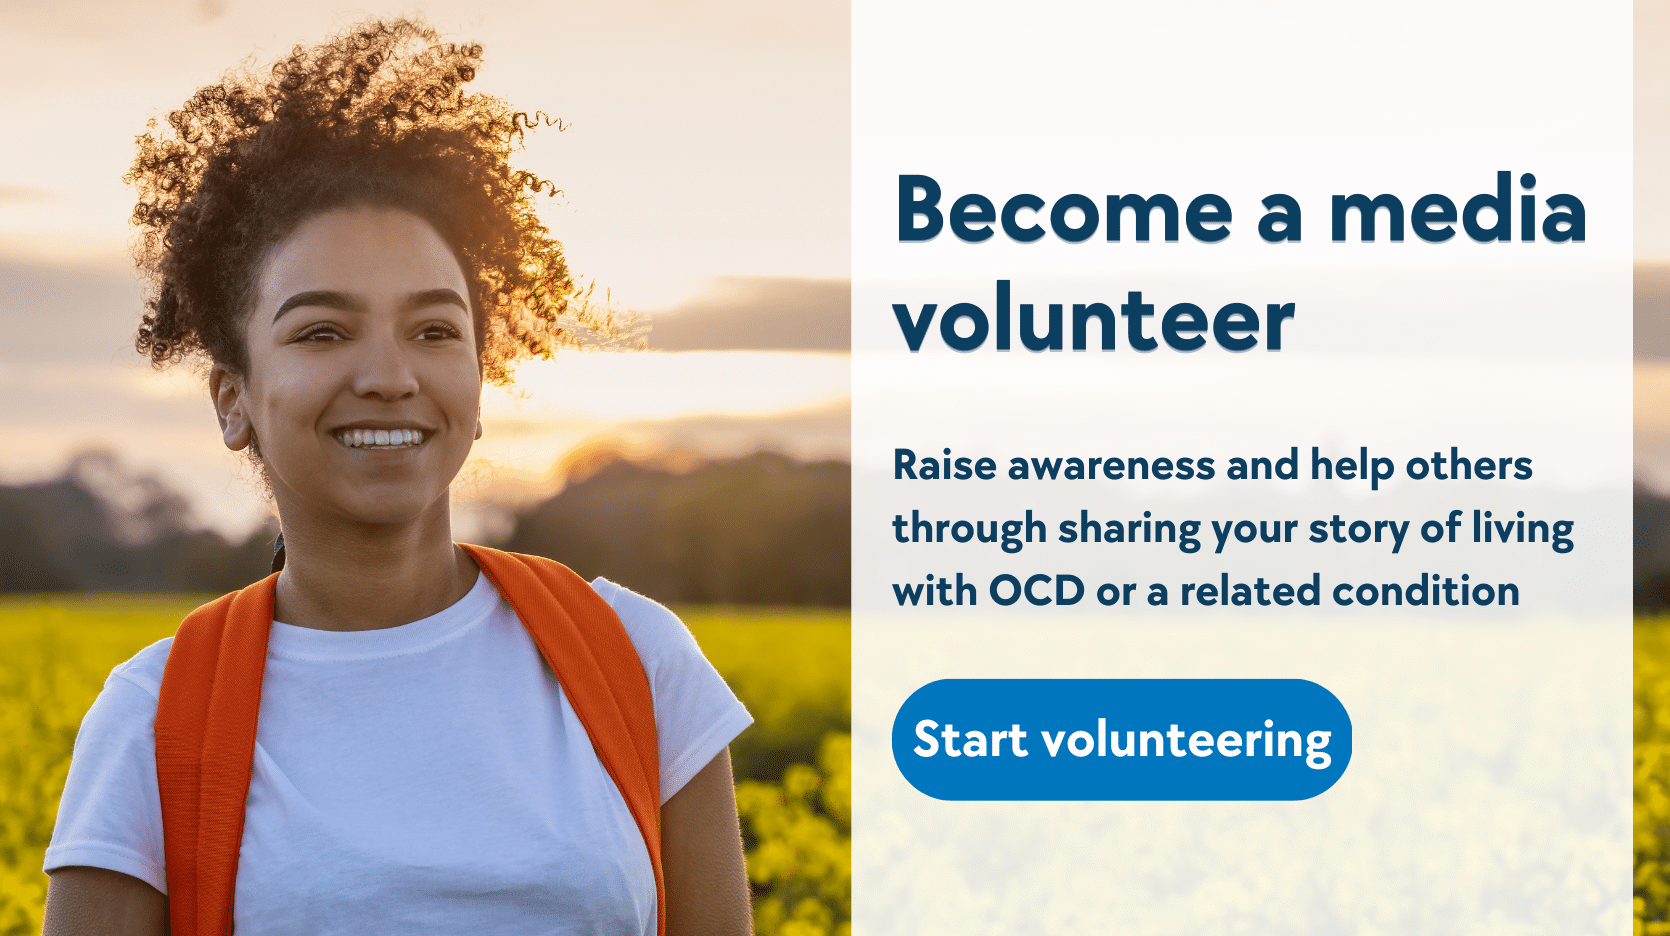 An image of a woman smiling, standing in a field of sunflowers. Text: Become a media volunteer. Raise awareness and help others through sharing your story of living with OCD or a related condition. Start volunteering.